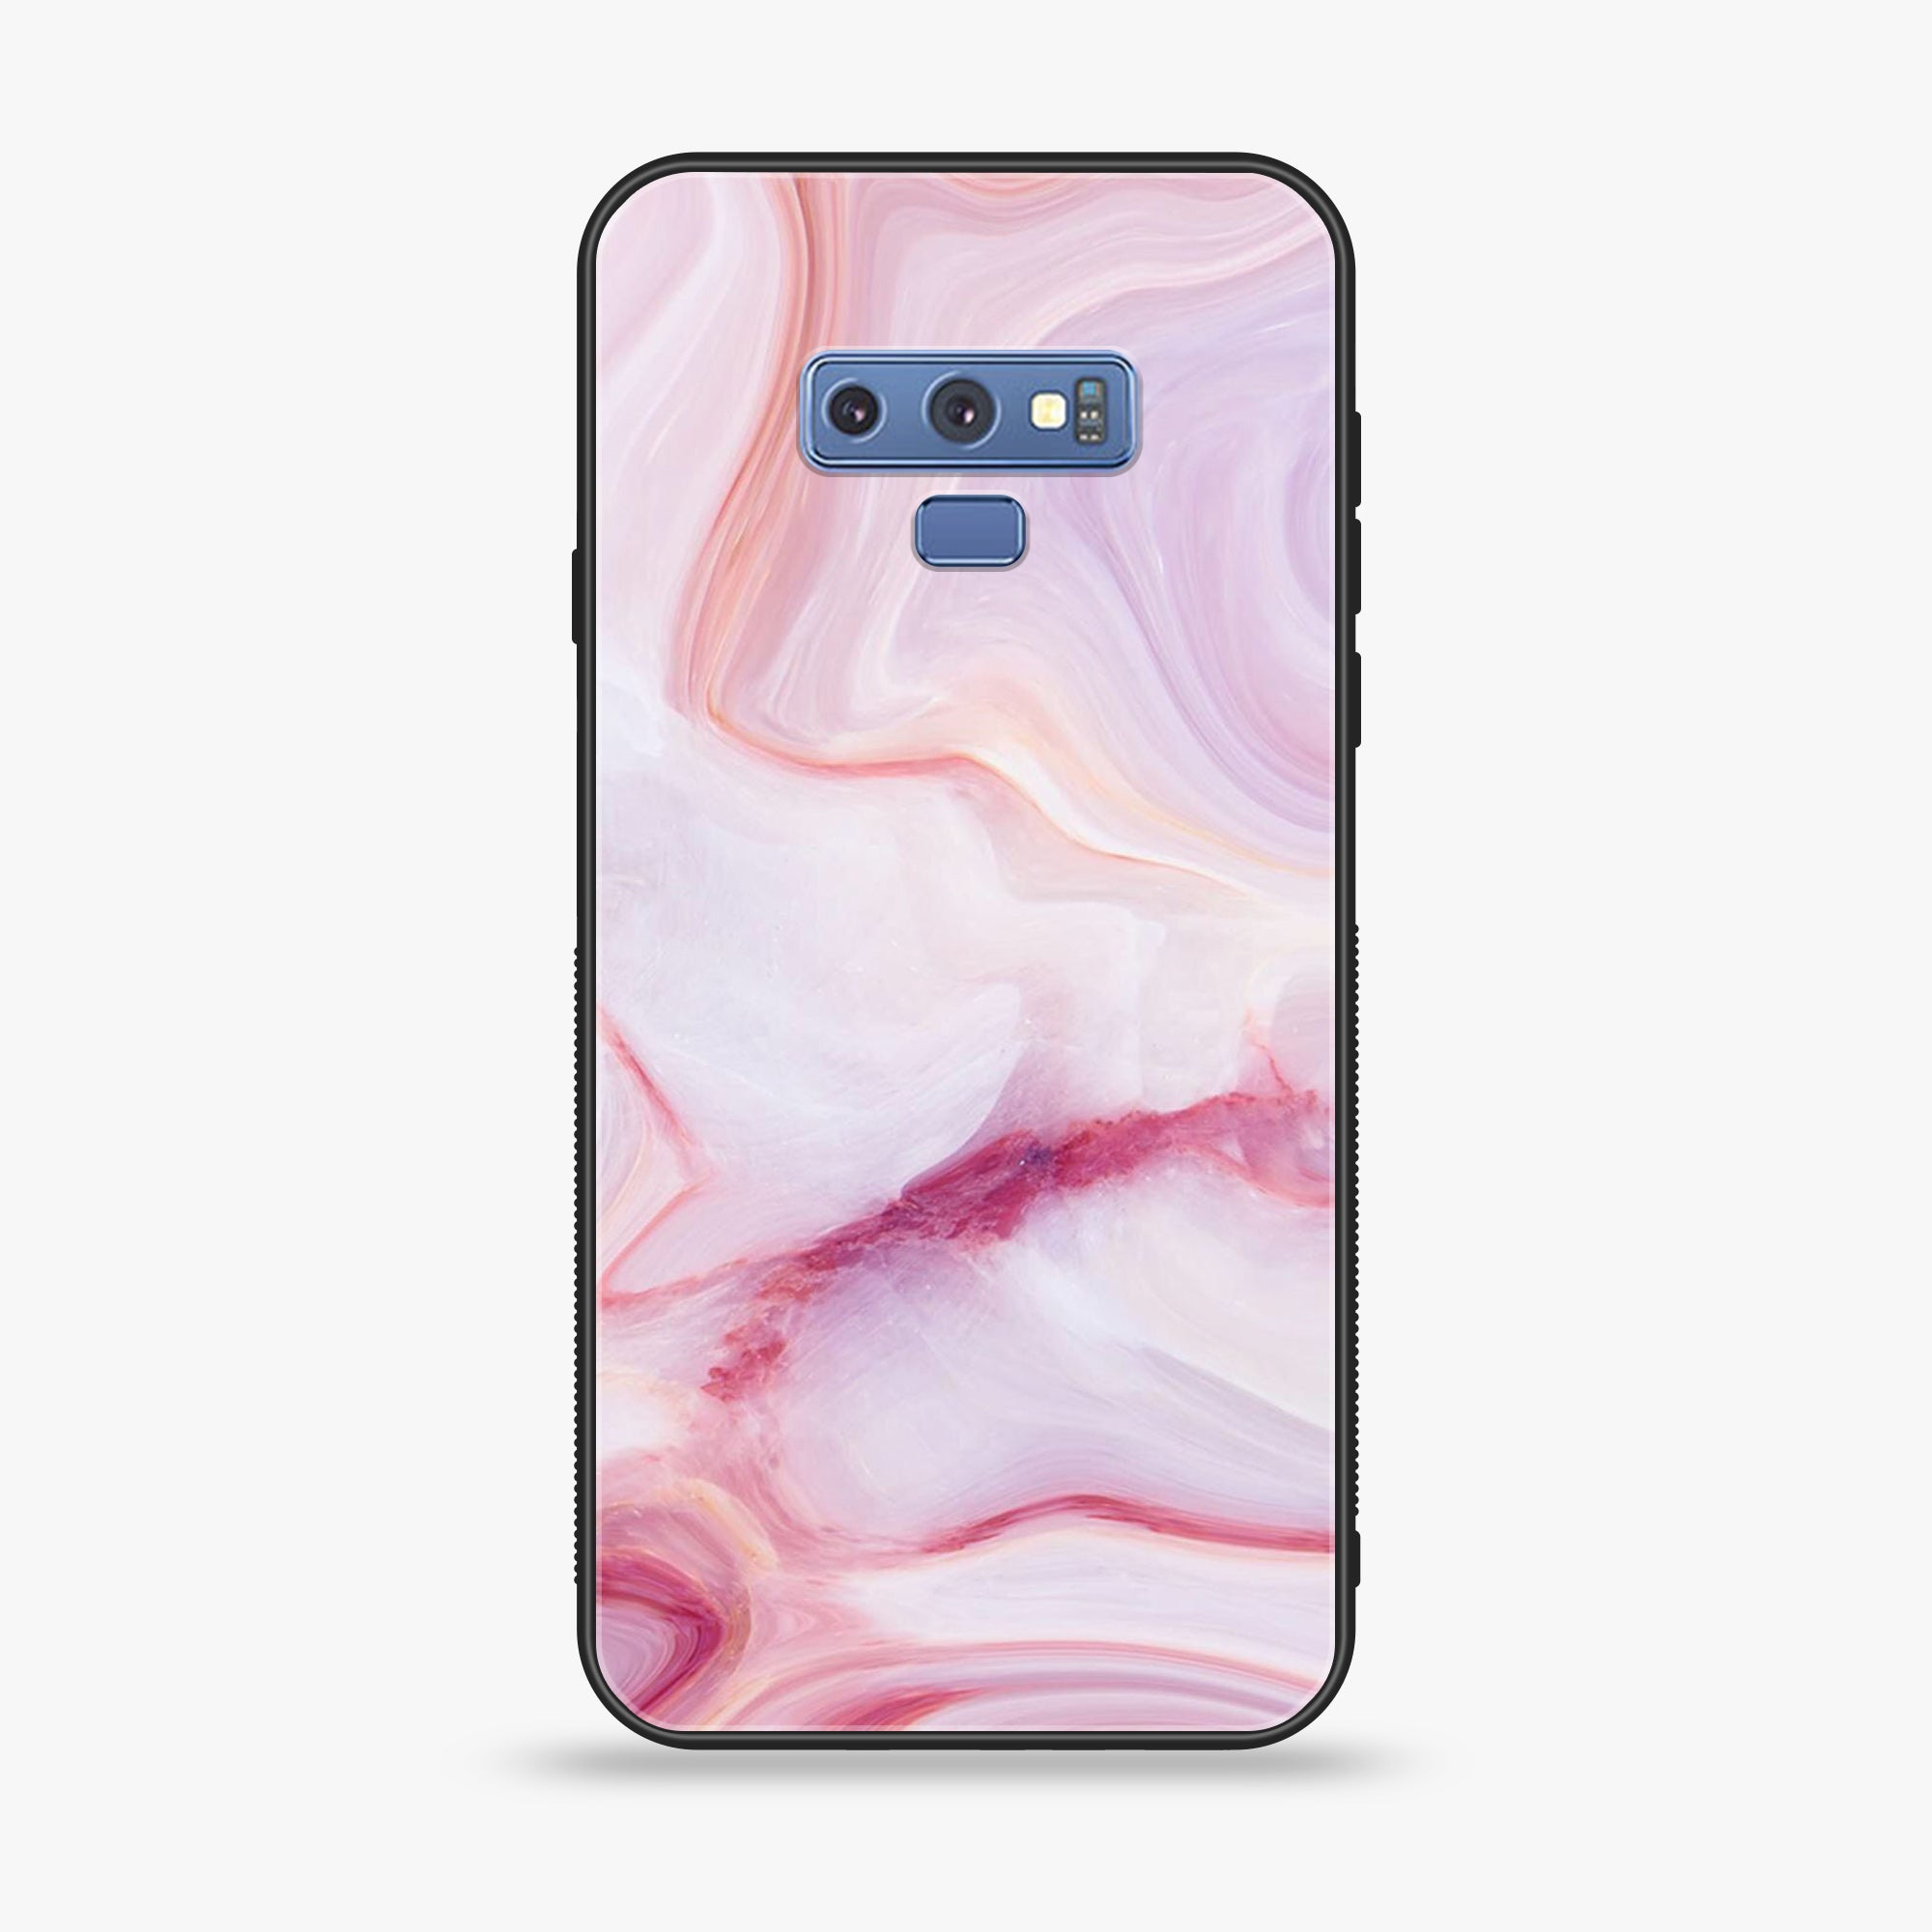 Samsung Galaxy Note 9 - Pink Marble Series - Premium Printed Glass soft Bumper shock Proof Case